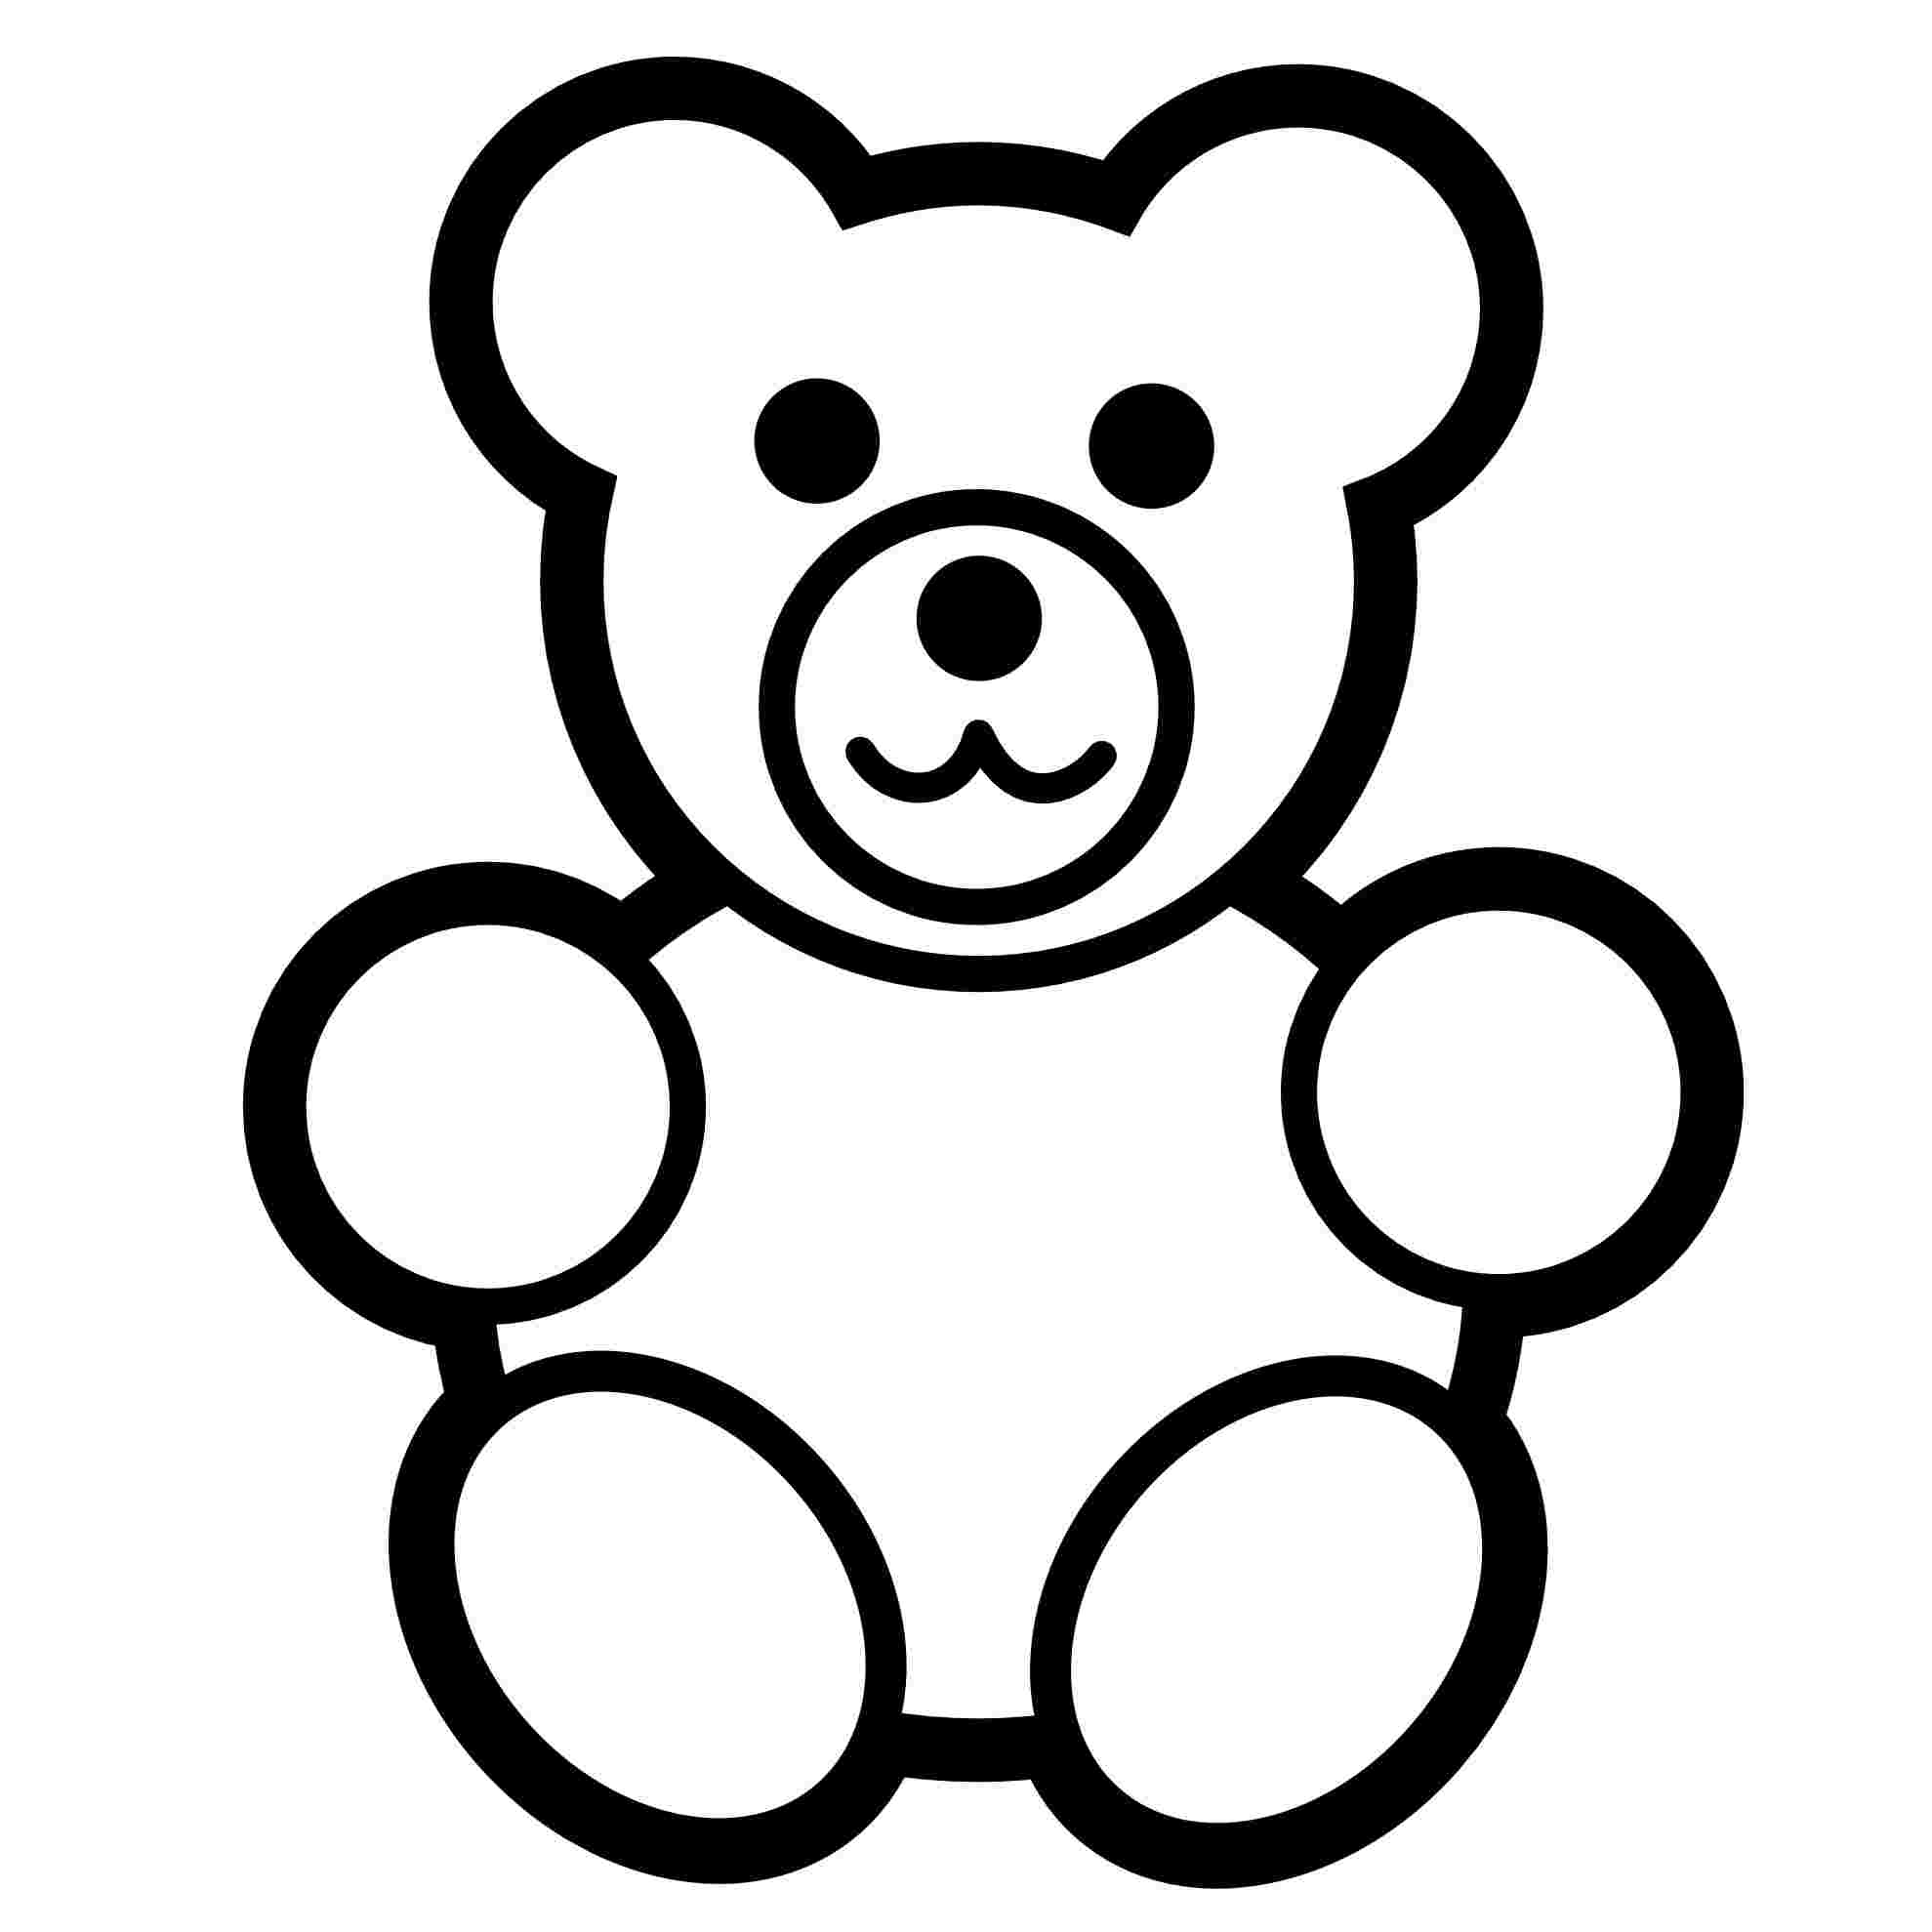 colouring pages of teddy bears free printable teddy bear.